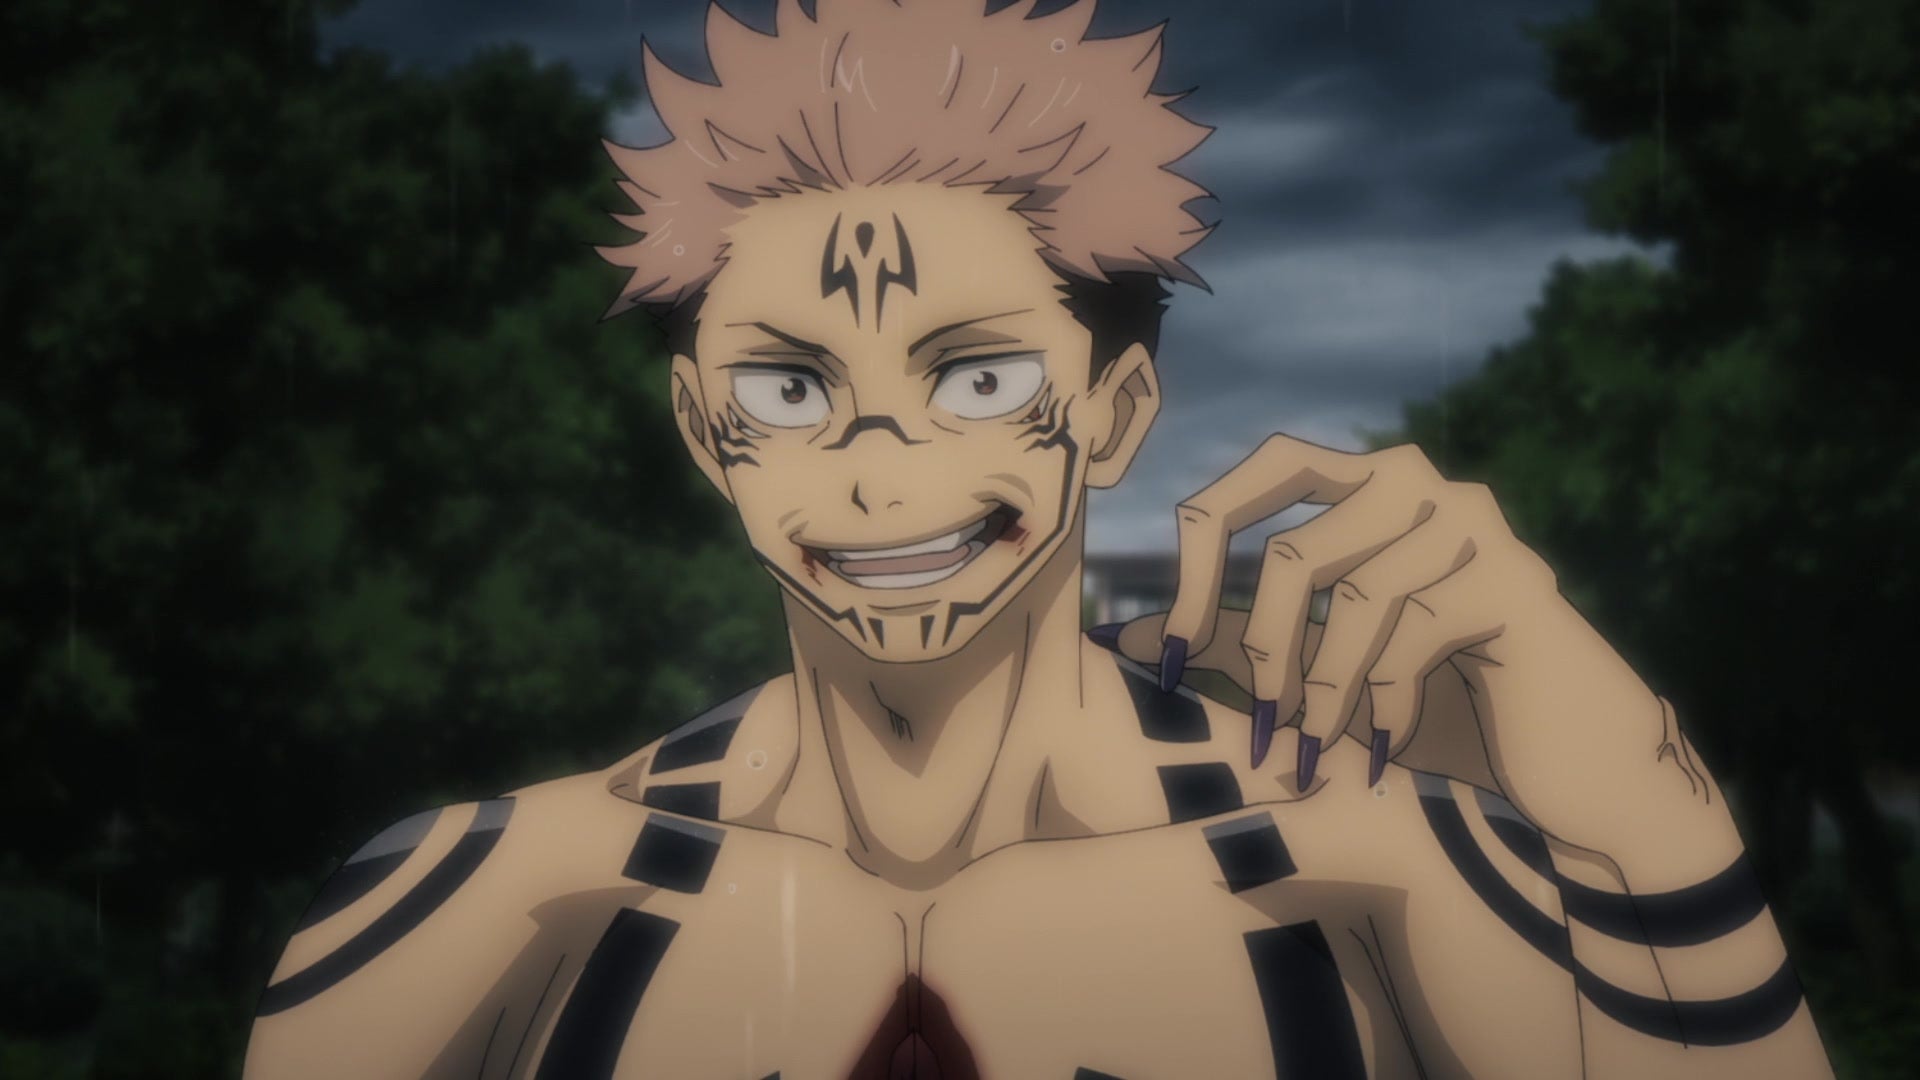 10 pairs of Bleach and Jujutsu Kaisen characters who have the same voice  actor